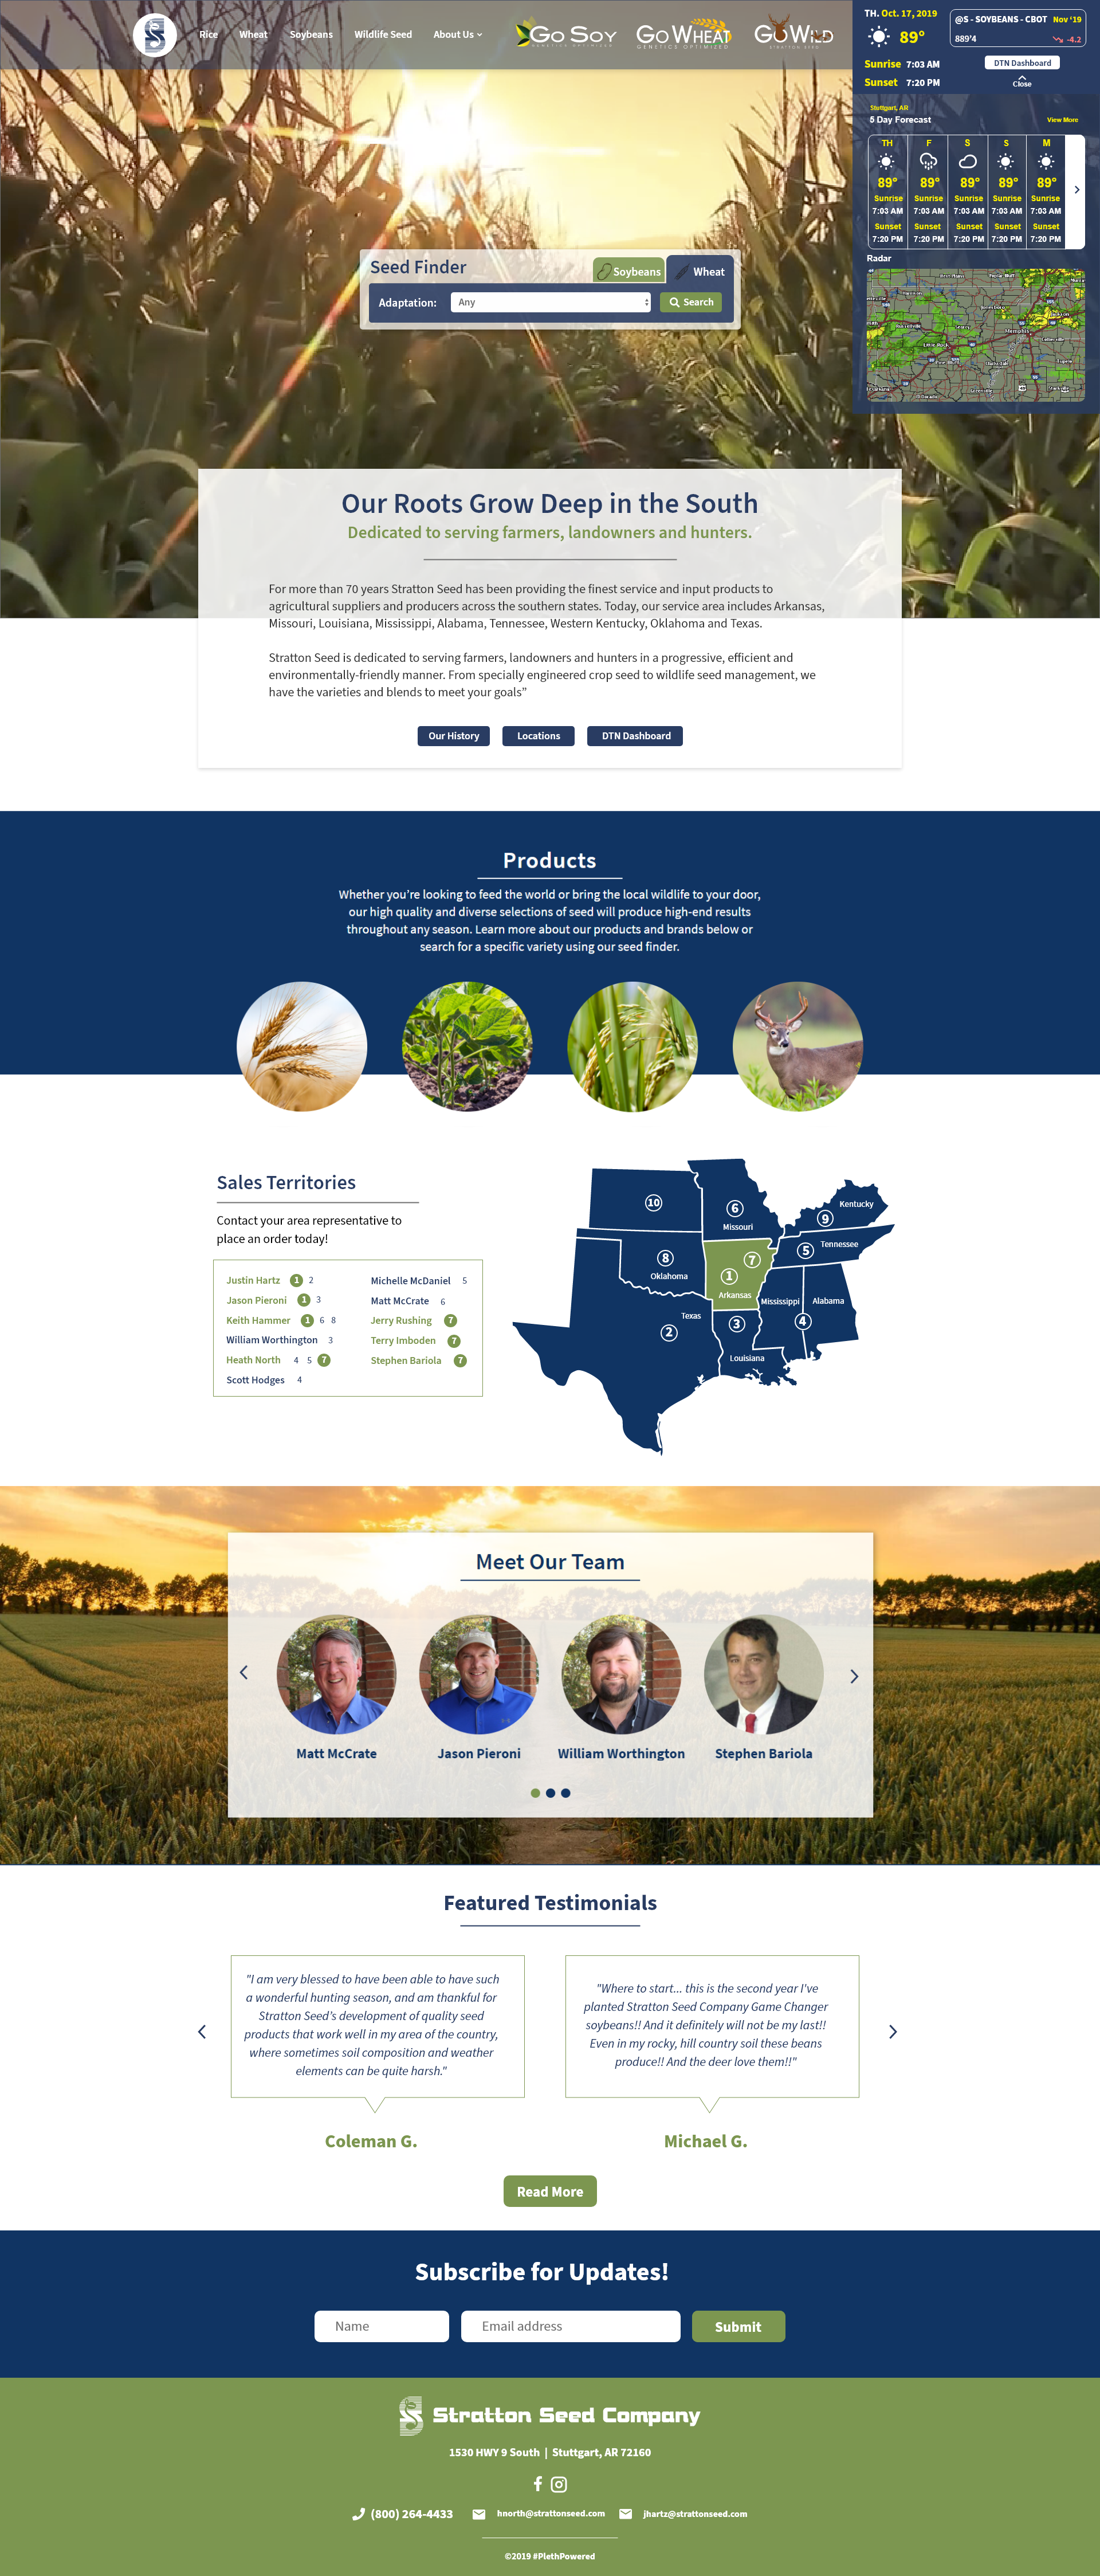 homepage layout of strattonseed.com